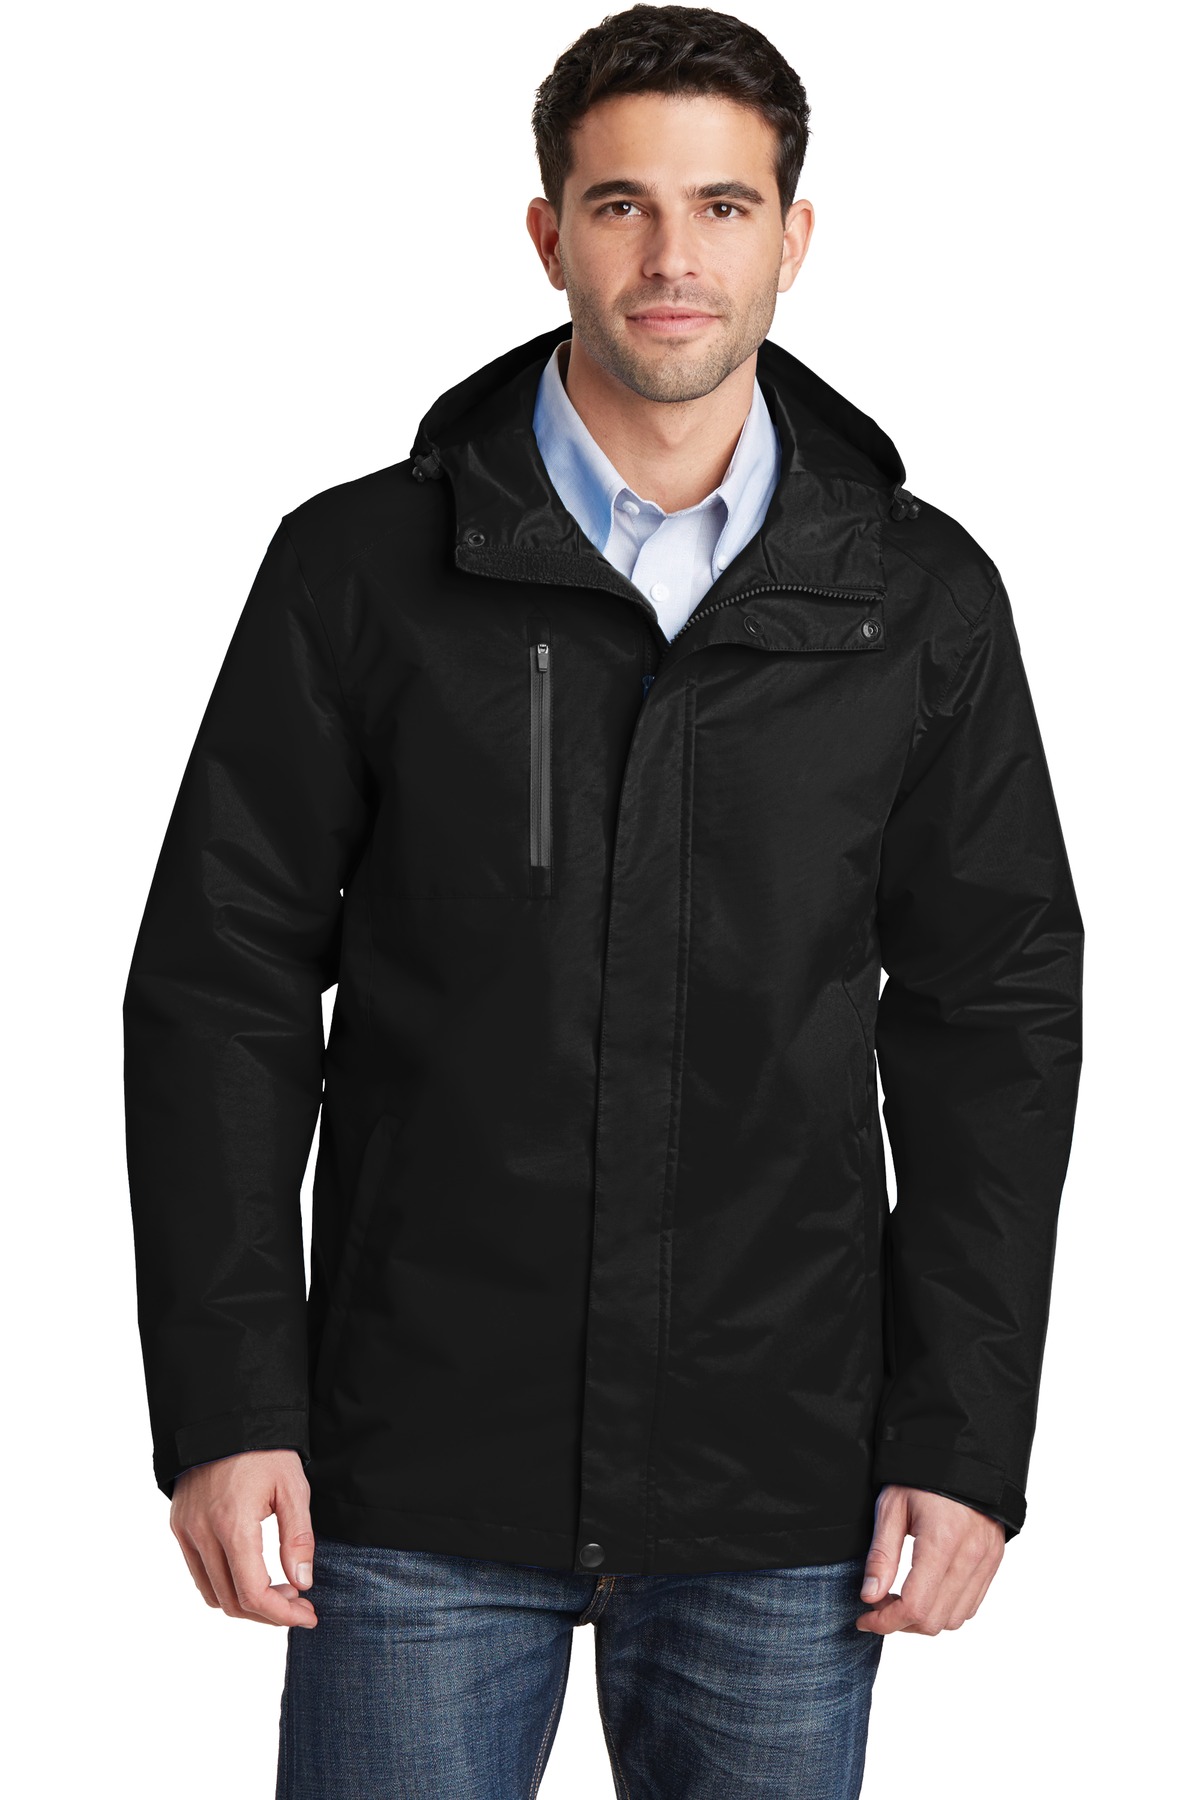 Port Authority  J331 - All-Conditions Jacket